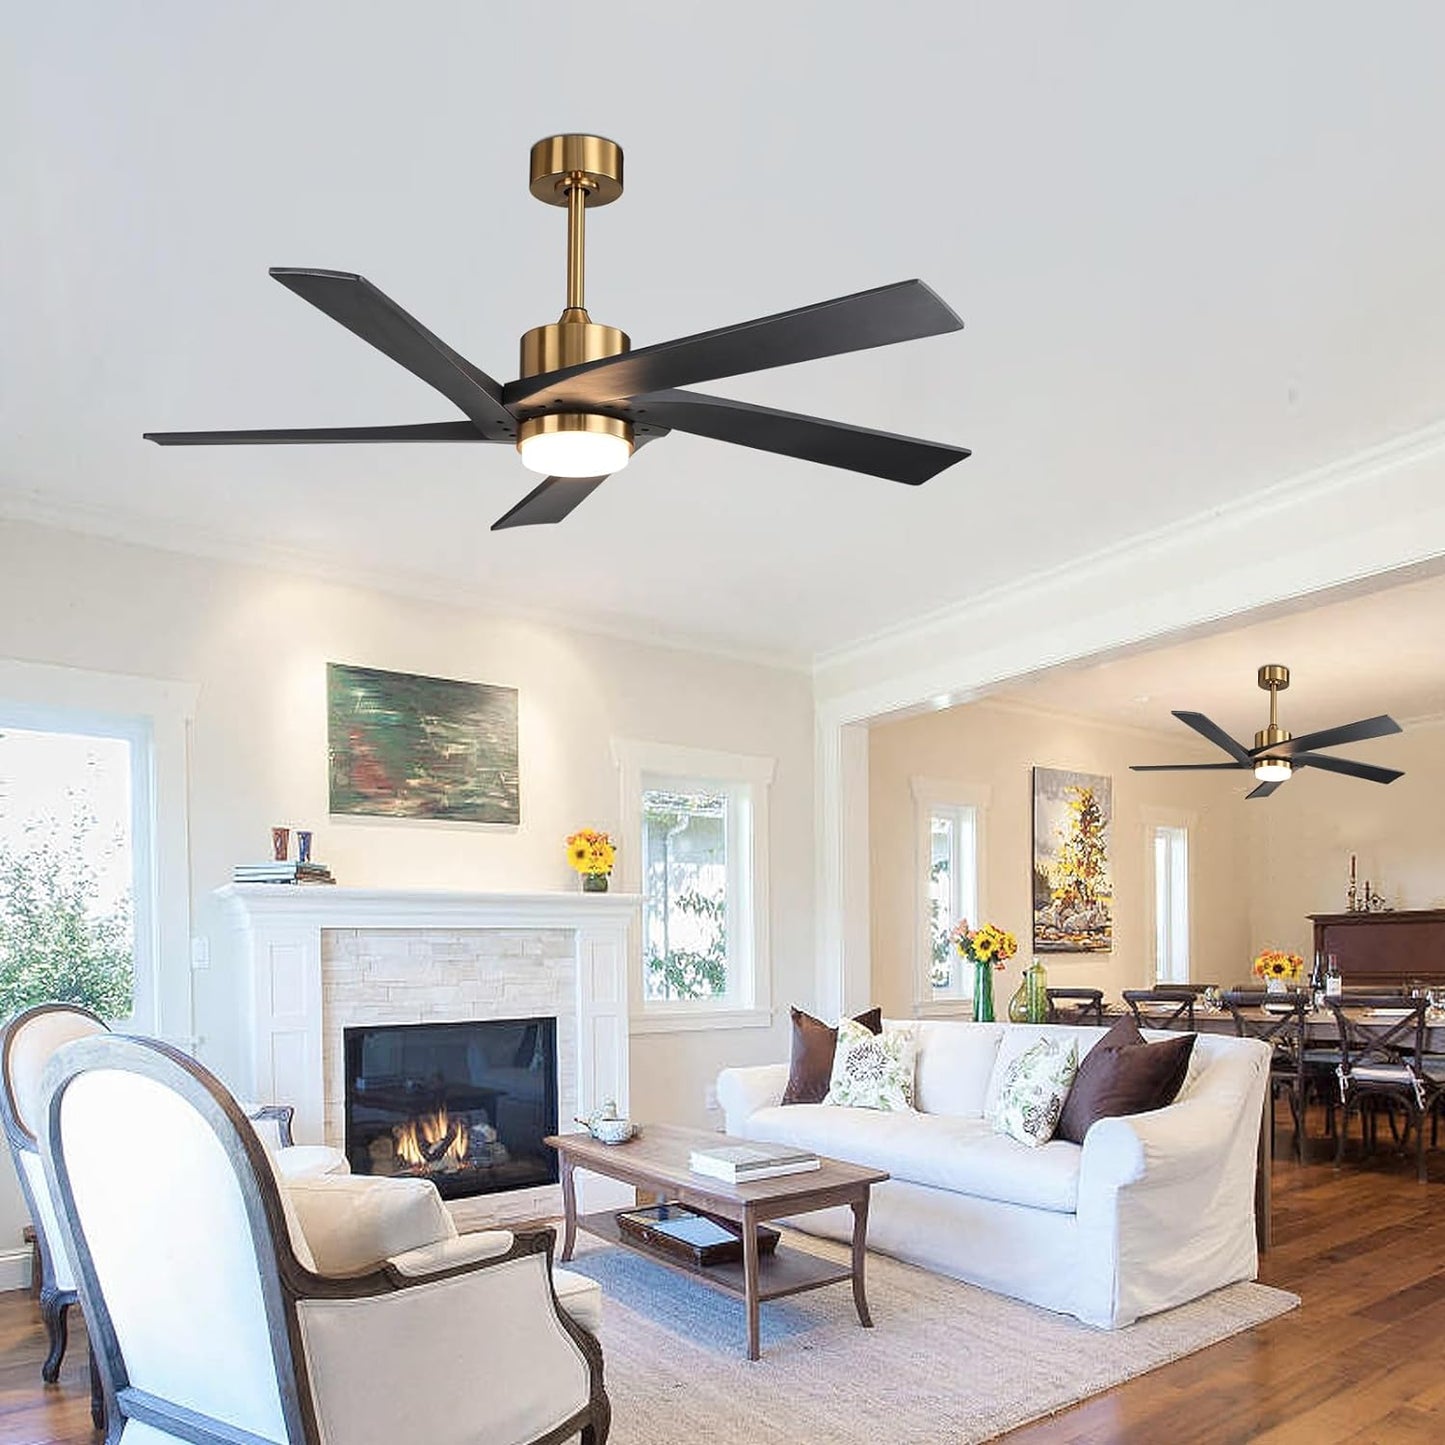 Ceiling Fans with Lights 54 Inch DC Ceiling Fan with Lights Remote Control 5 Reversible Carved Wood Blades Fandelier Ceiling Fan with Light 6-Speed Noiseless Ceiling Fan in Brass Finish with Blades